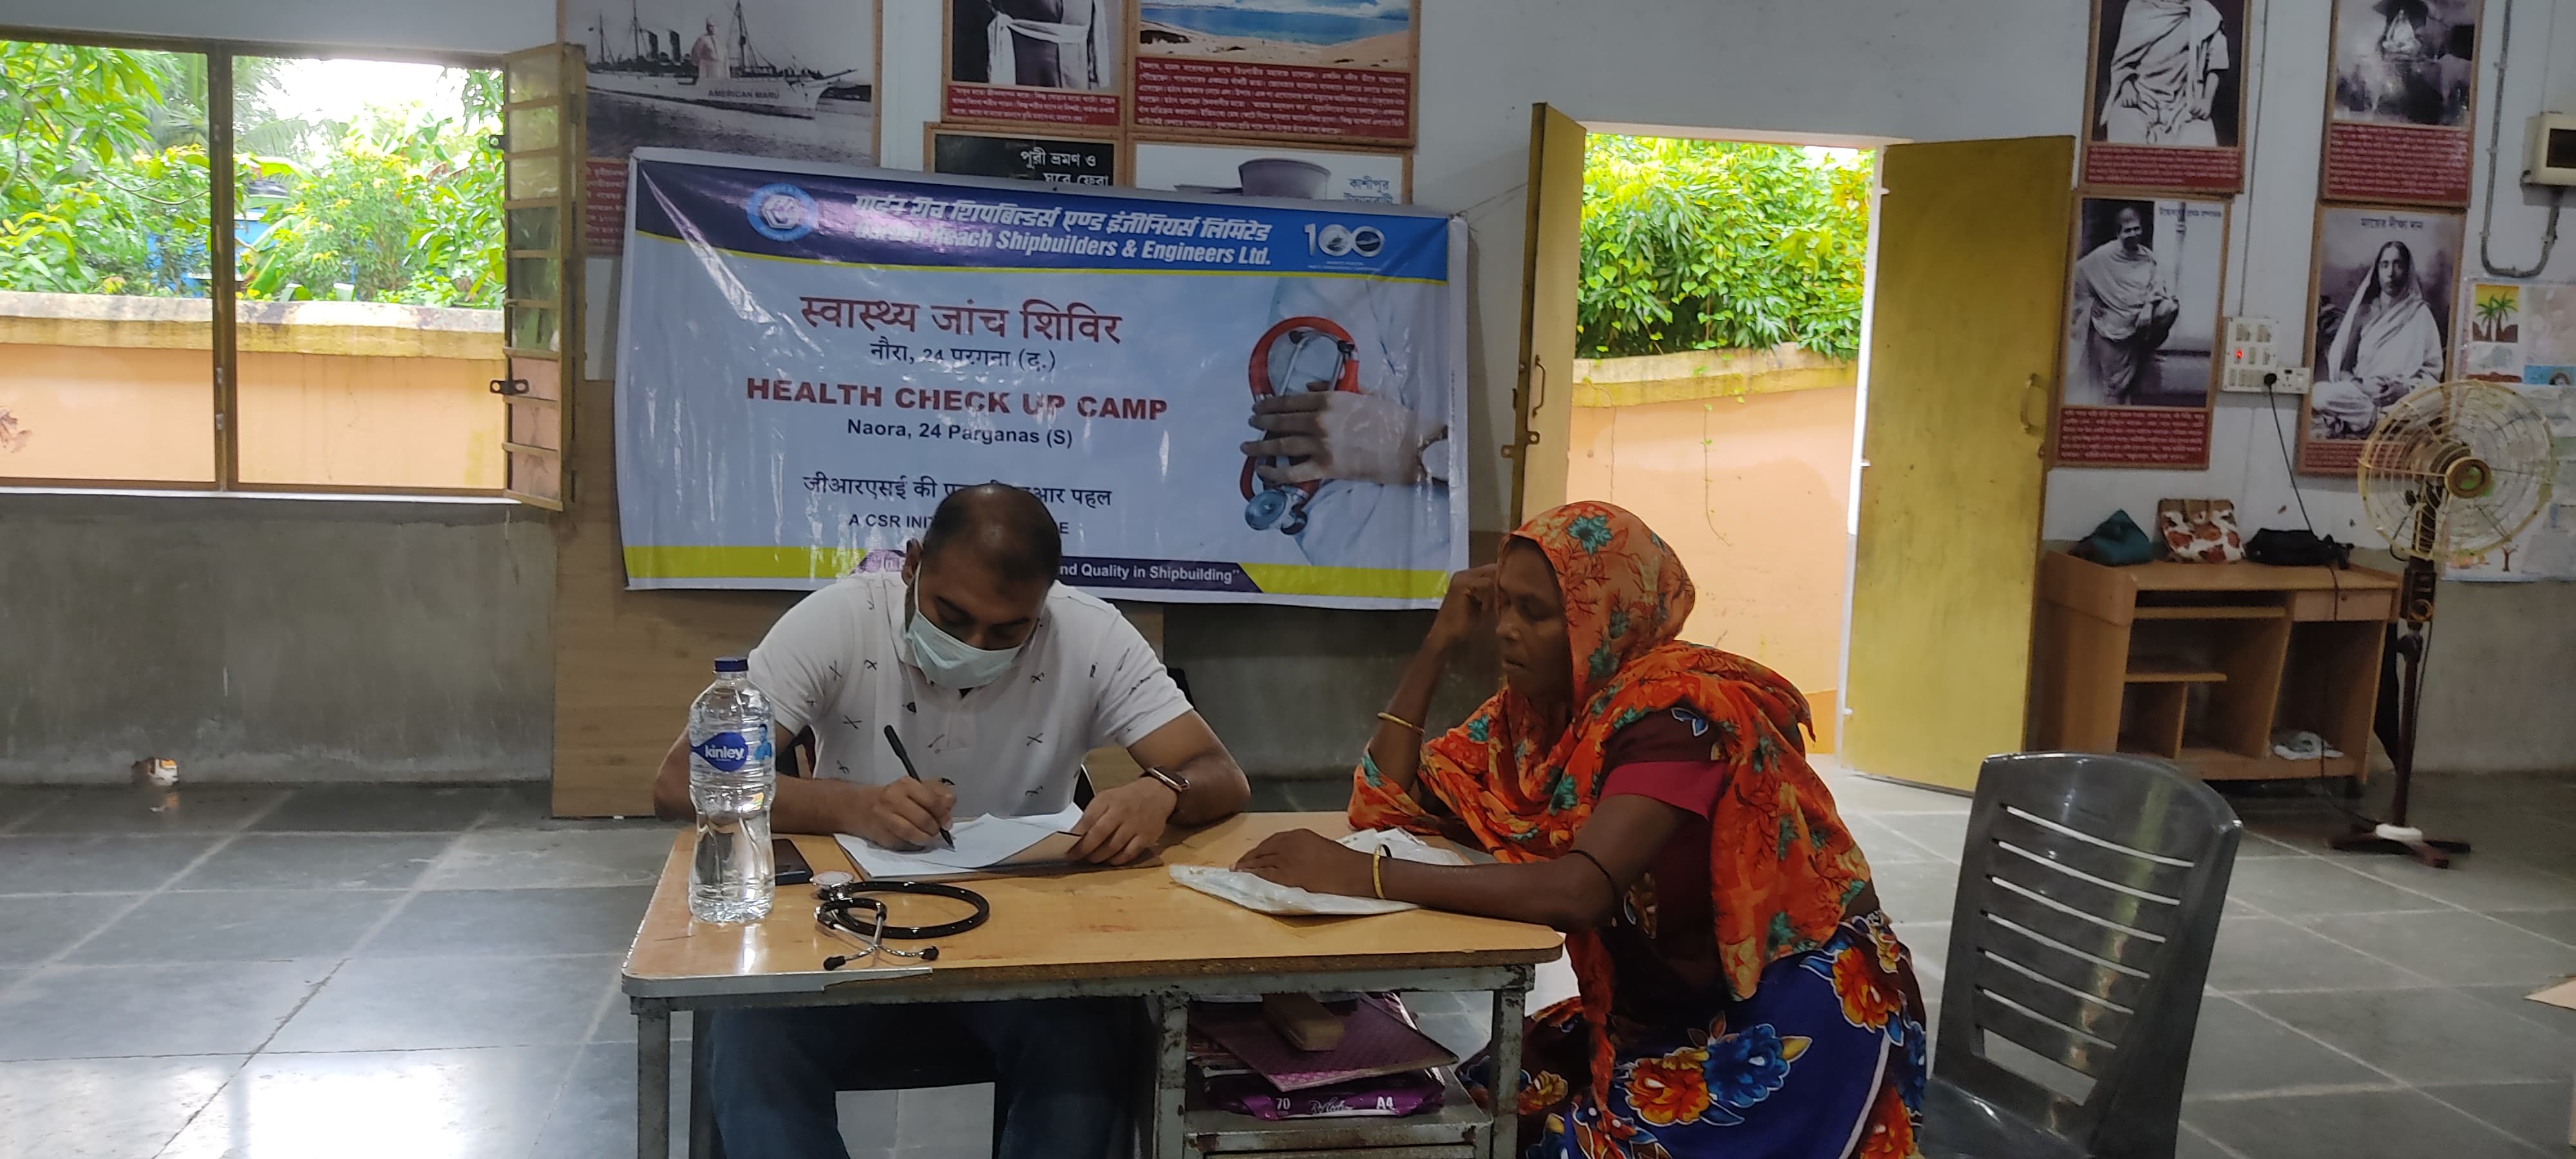 Health Check-Up Camp by GRSE at Naora, 24 PGS(S) on 14 Sep 23